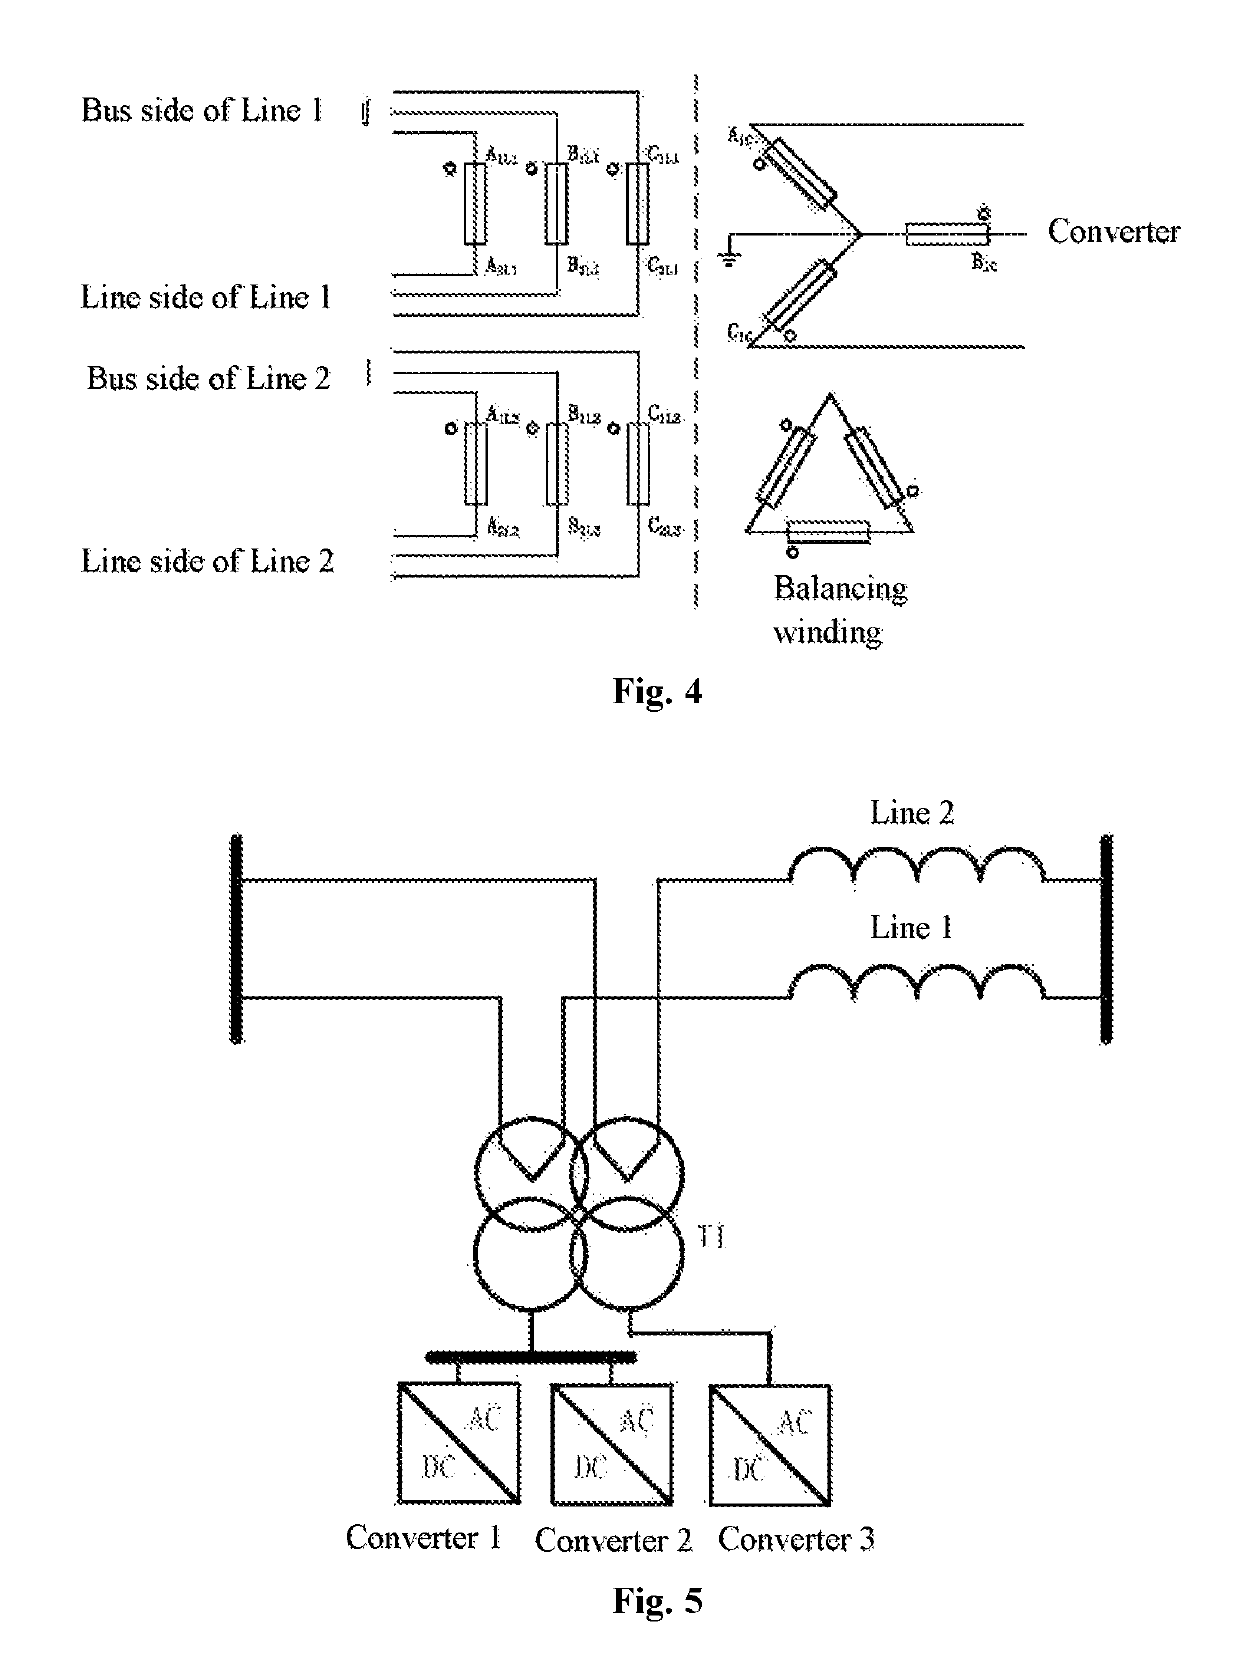 Series compensation device applicable to double-circuit line